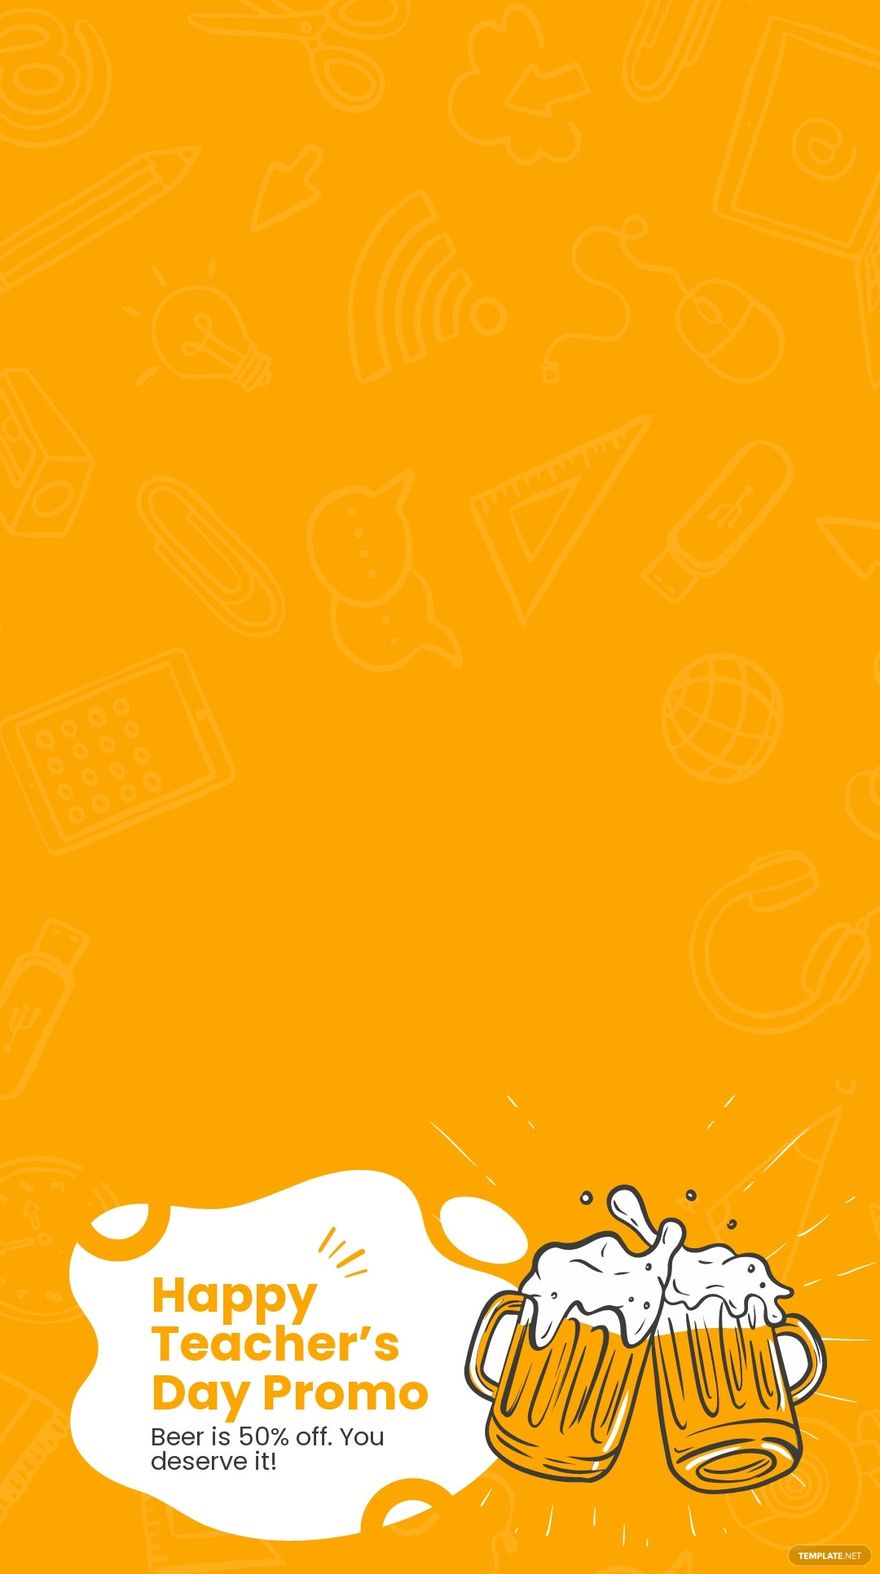 Funny Teacher's Day Snapchat Geofilter Template